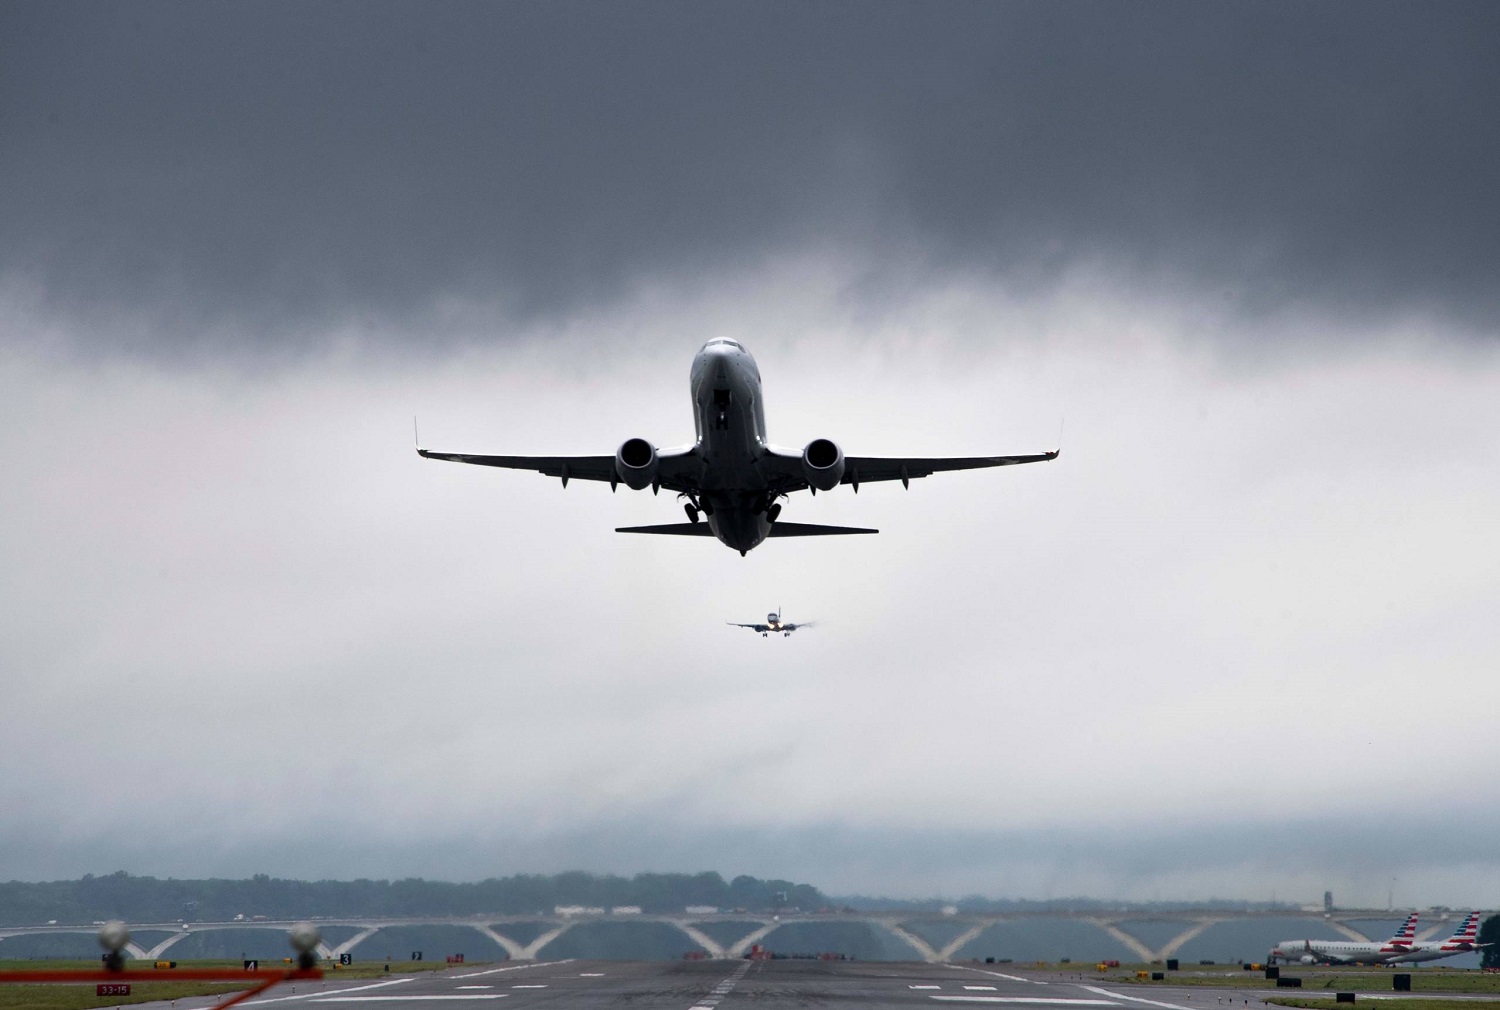 A flight takes off as another lands at Ronald Reagan Washington National Airport in Arlington, Virginia, on July 8, 2019, after a storm delayed flights. (Photo by Jim WATSON / AFP)        (Photo credit should read JIM WATSON/AFP via Getty Images)